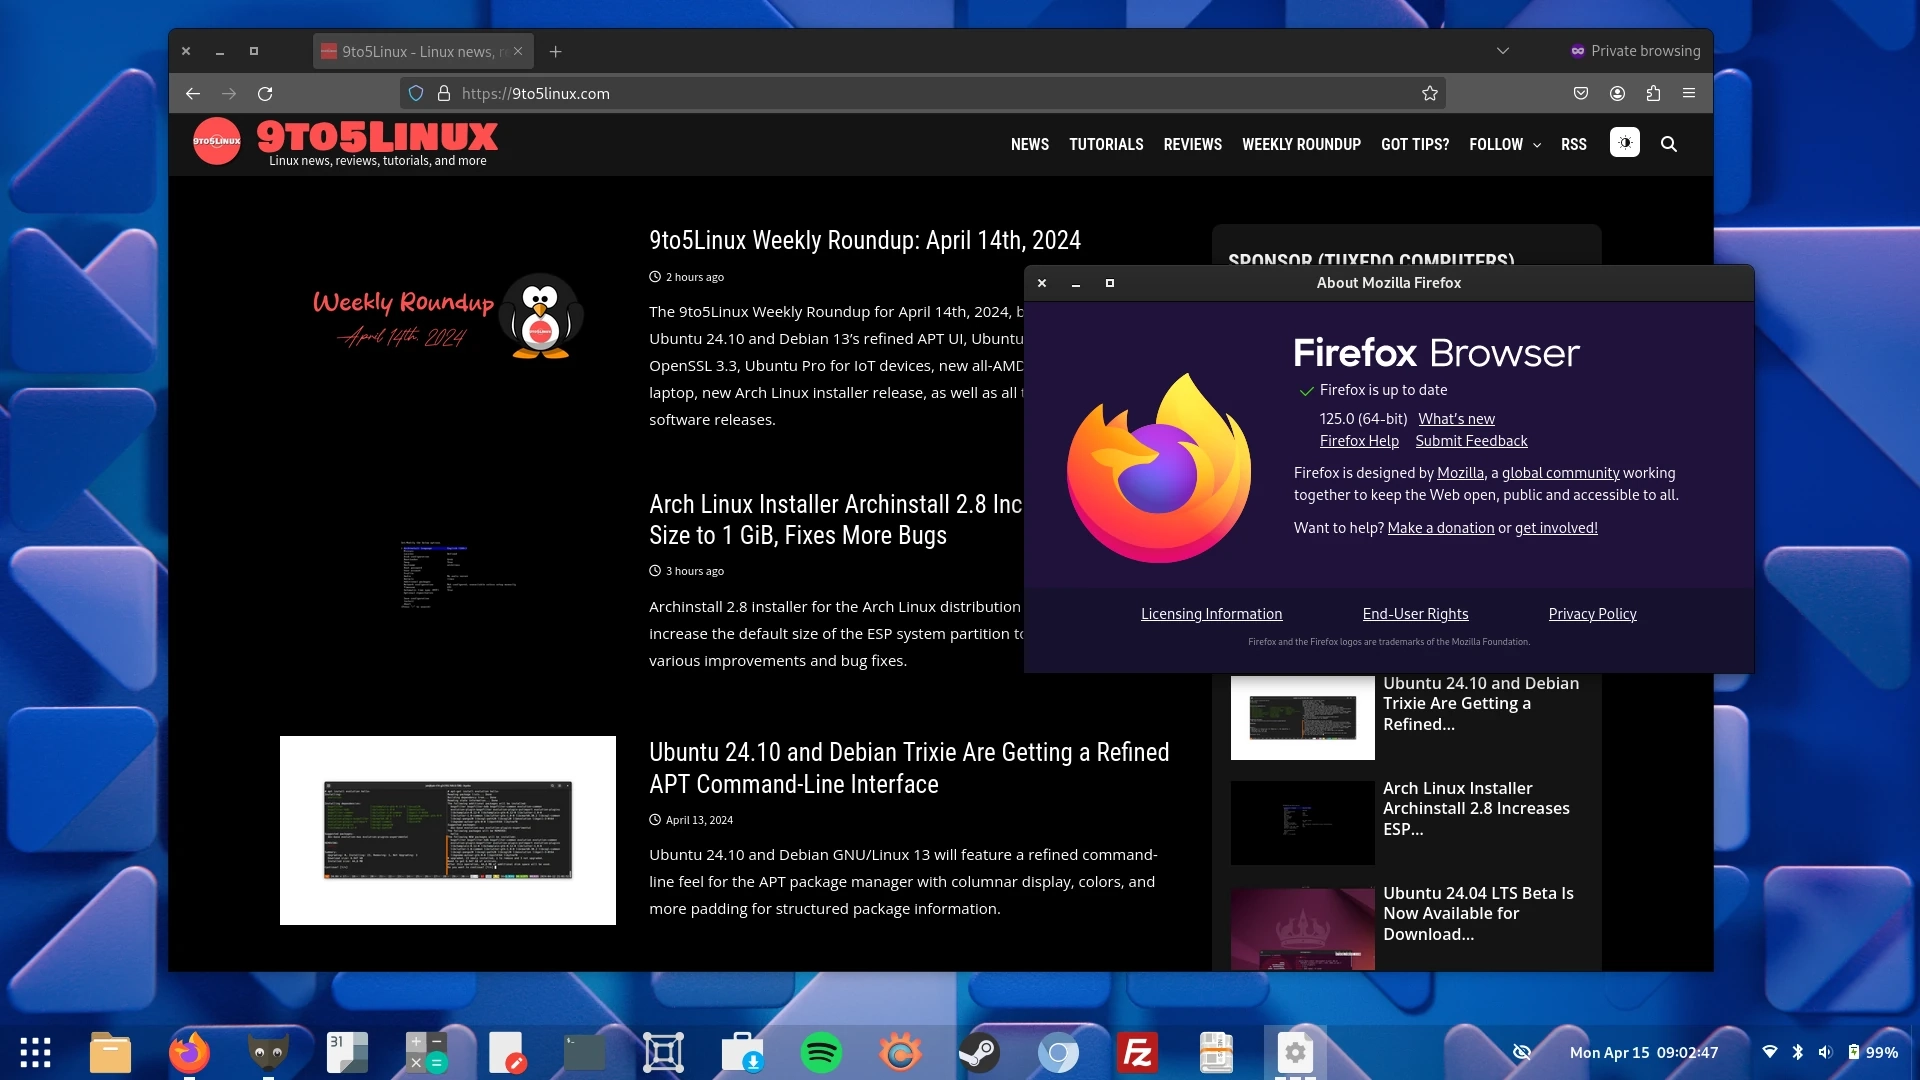 Discover the New Features with Mozilla Firefox 125: Now Available for Download!